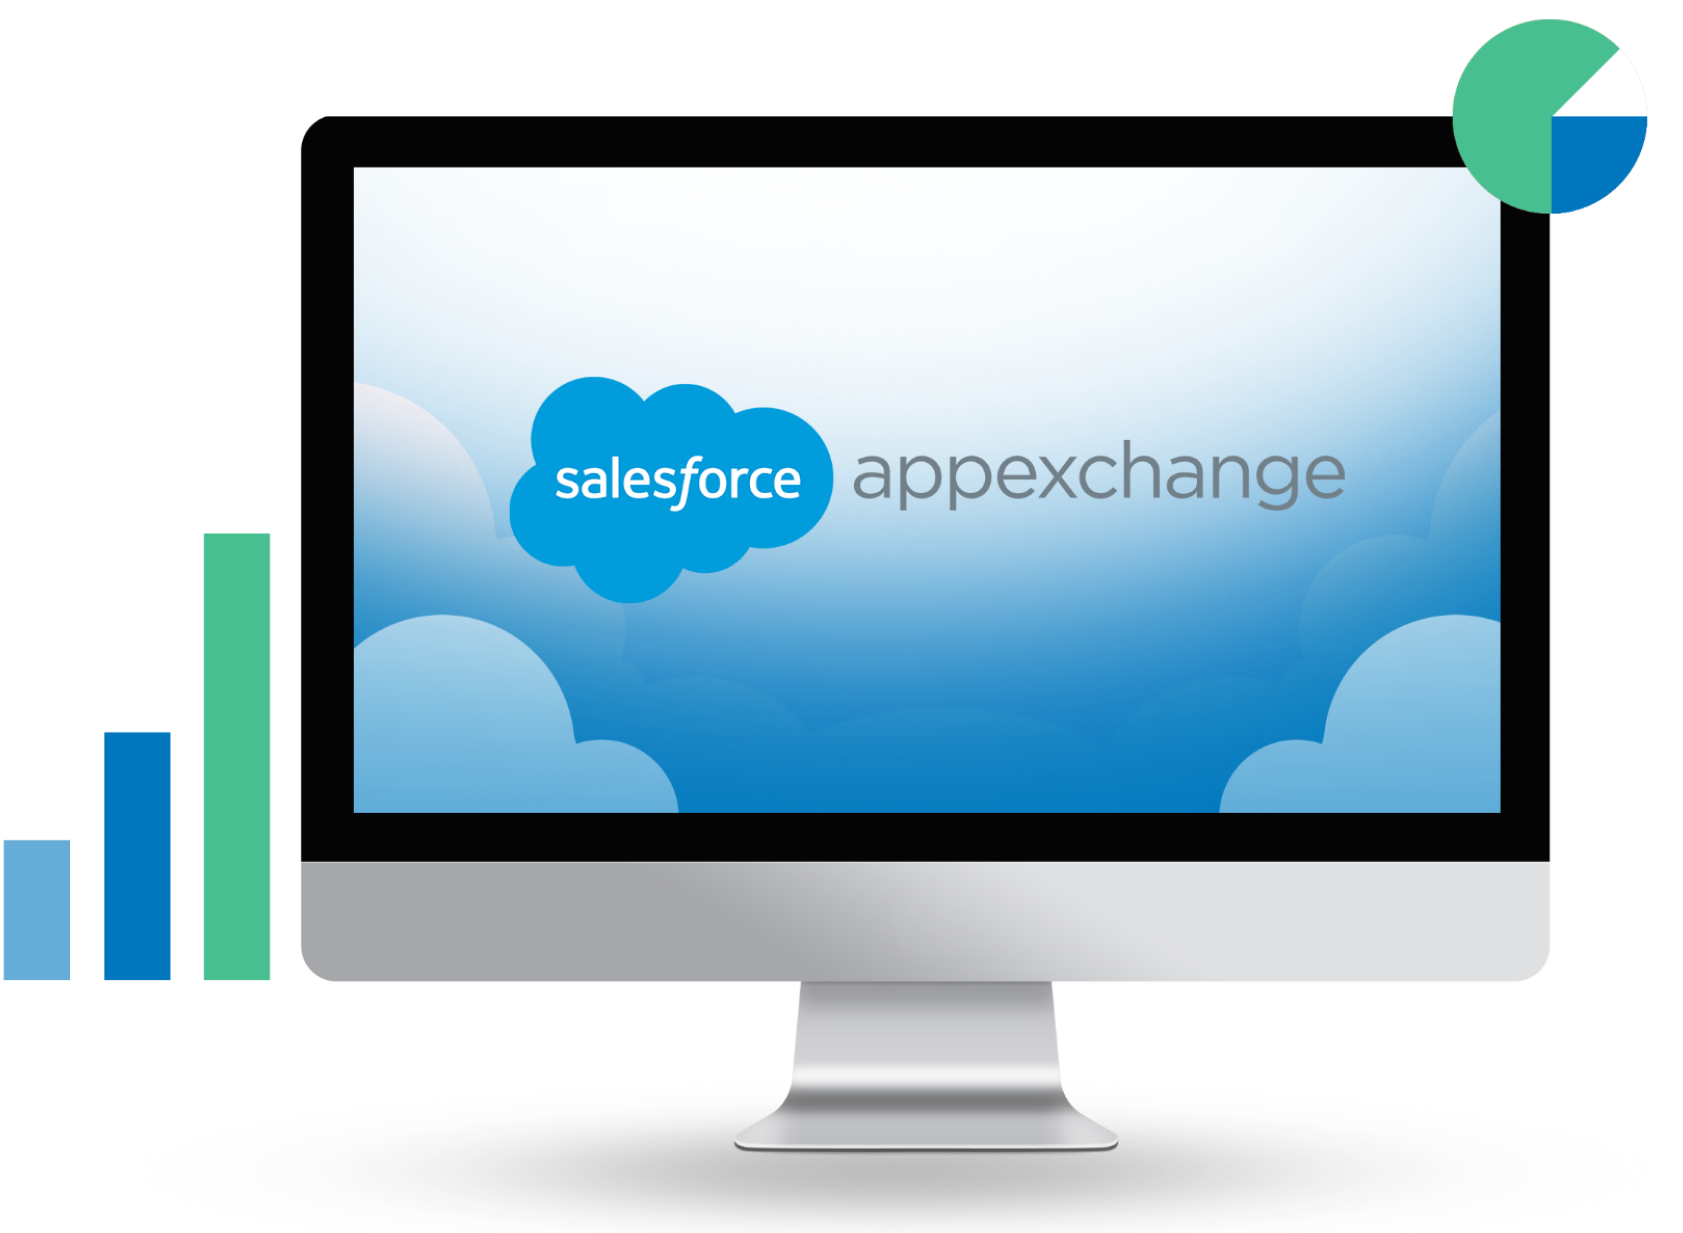 Salesforce AppExchange products